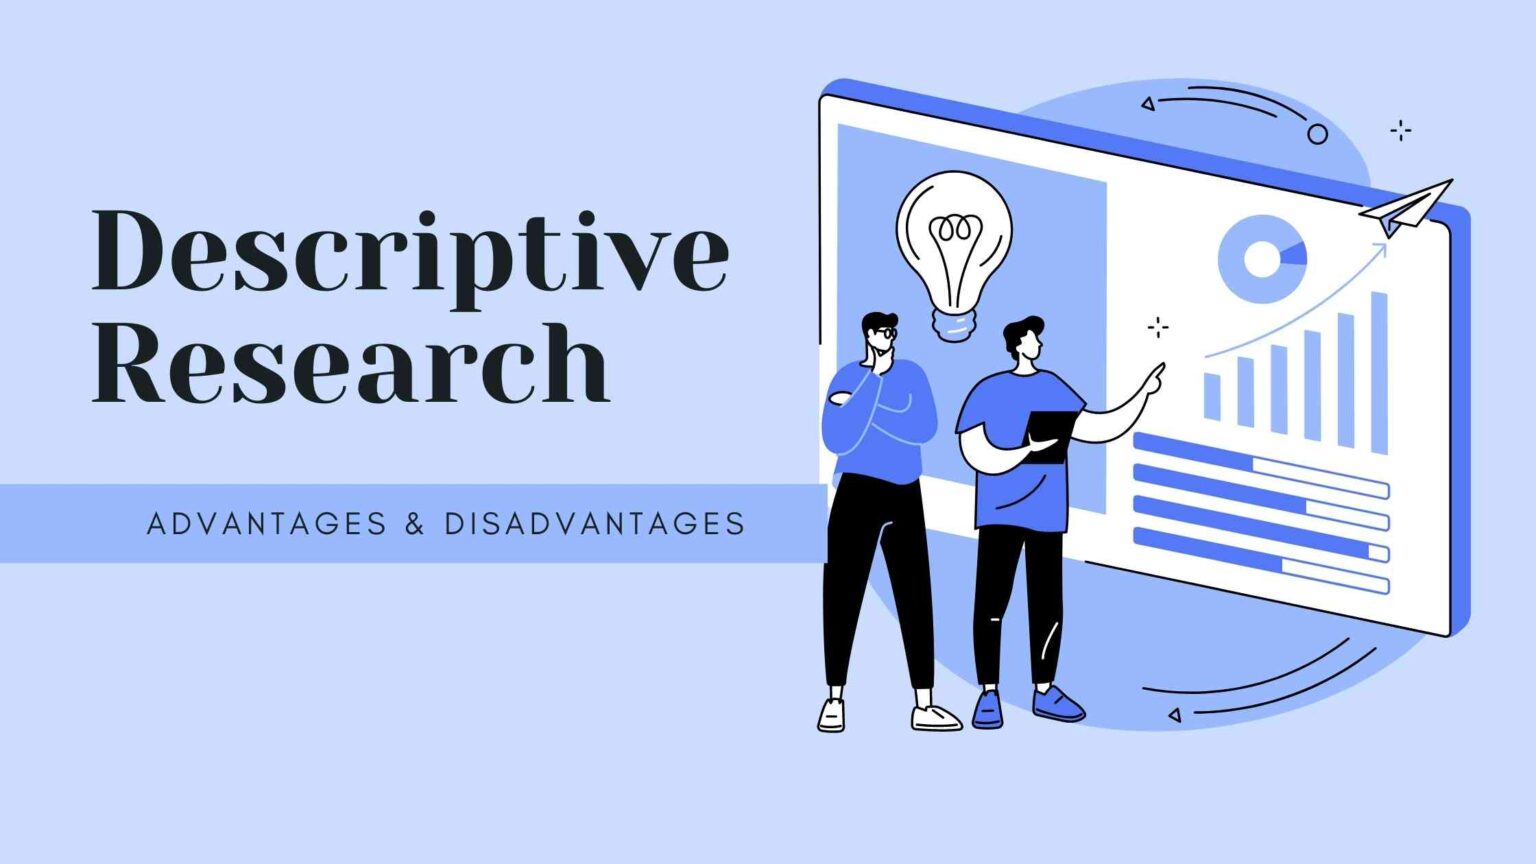 what are some limitations of a descriptive research design